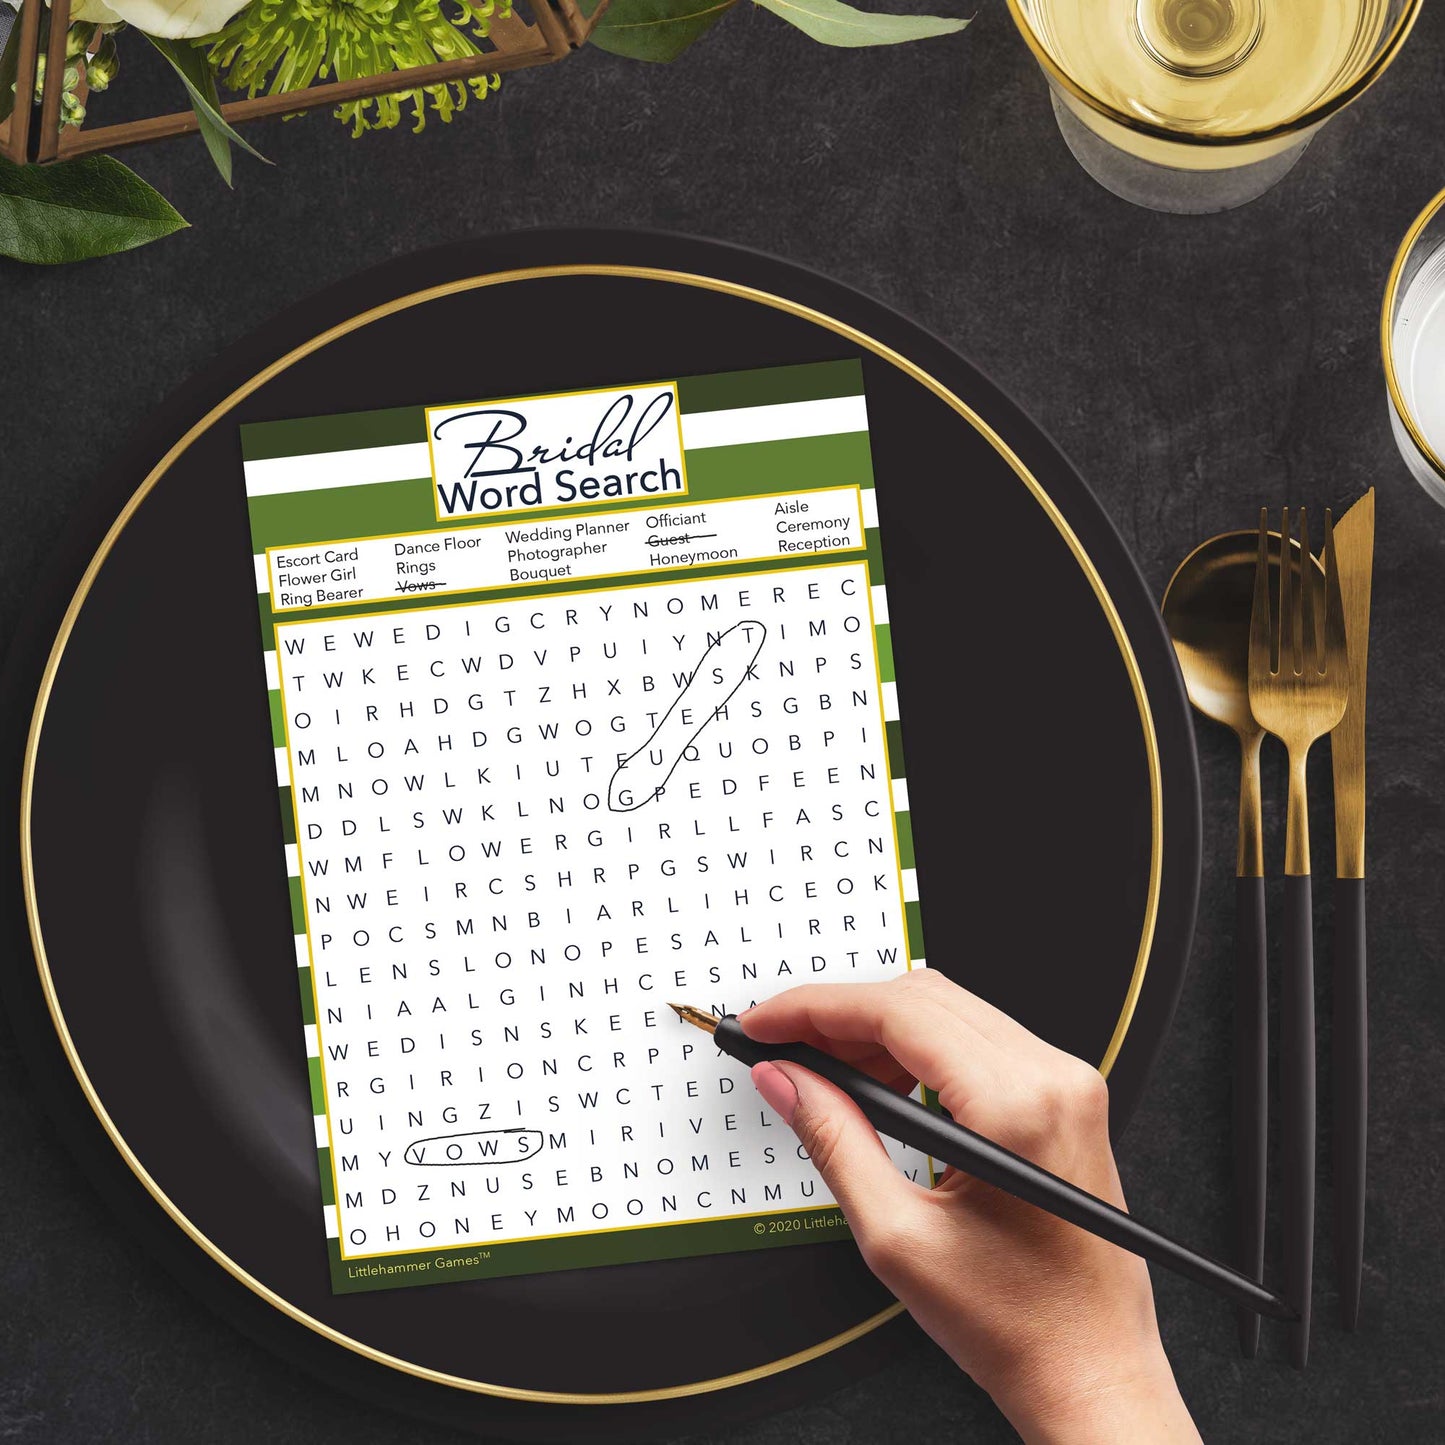 Woman with a pen playing a green-striped Bridal Word Search game card at a dark place setting